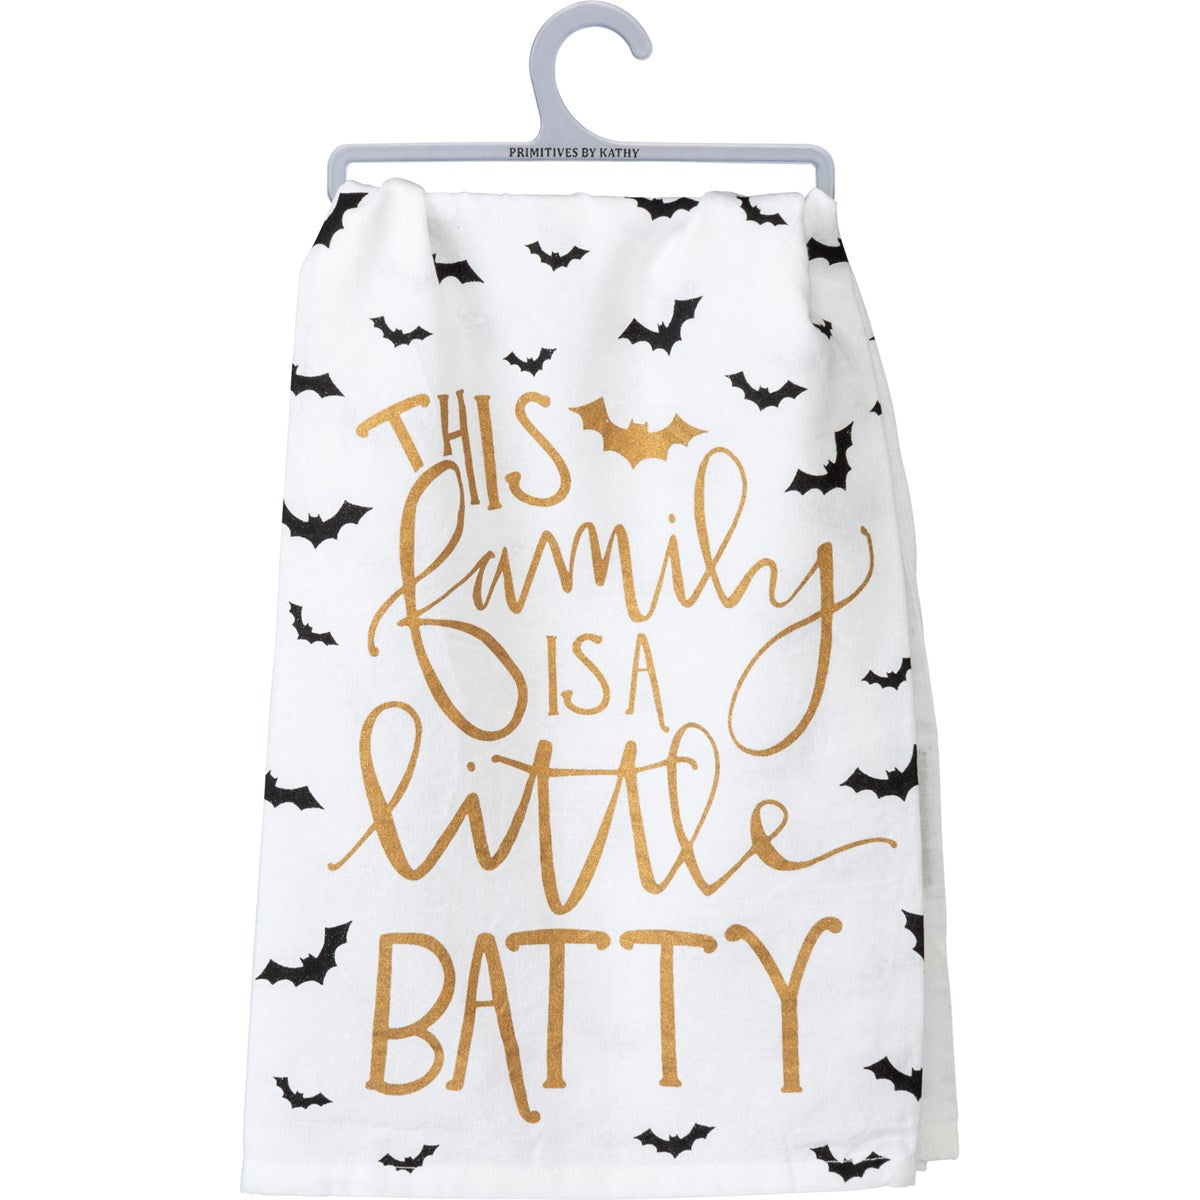 Kitchen Towel - This Family Is A Little Batty